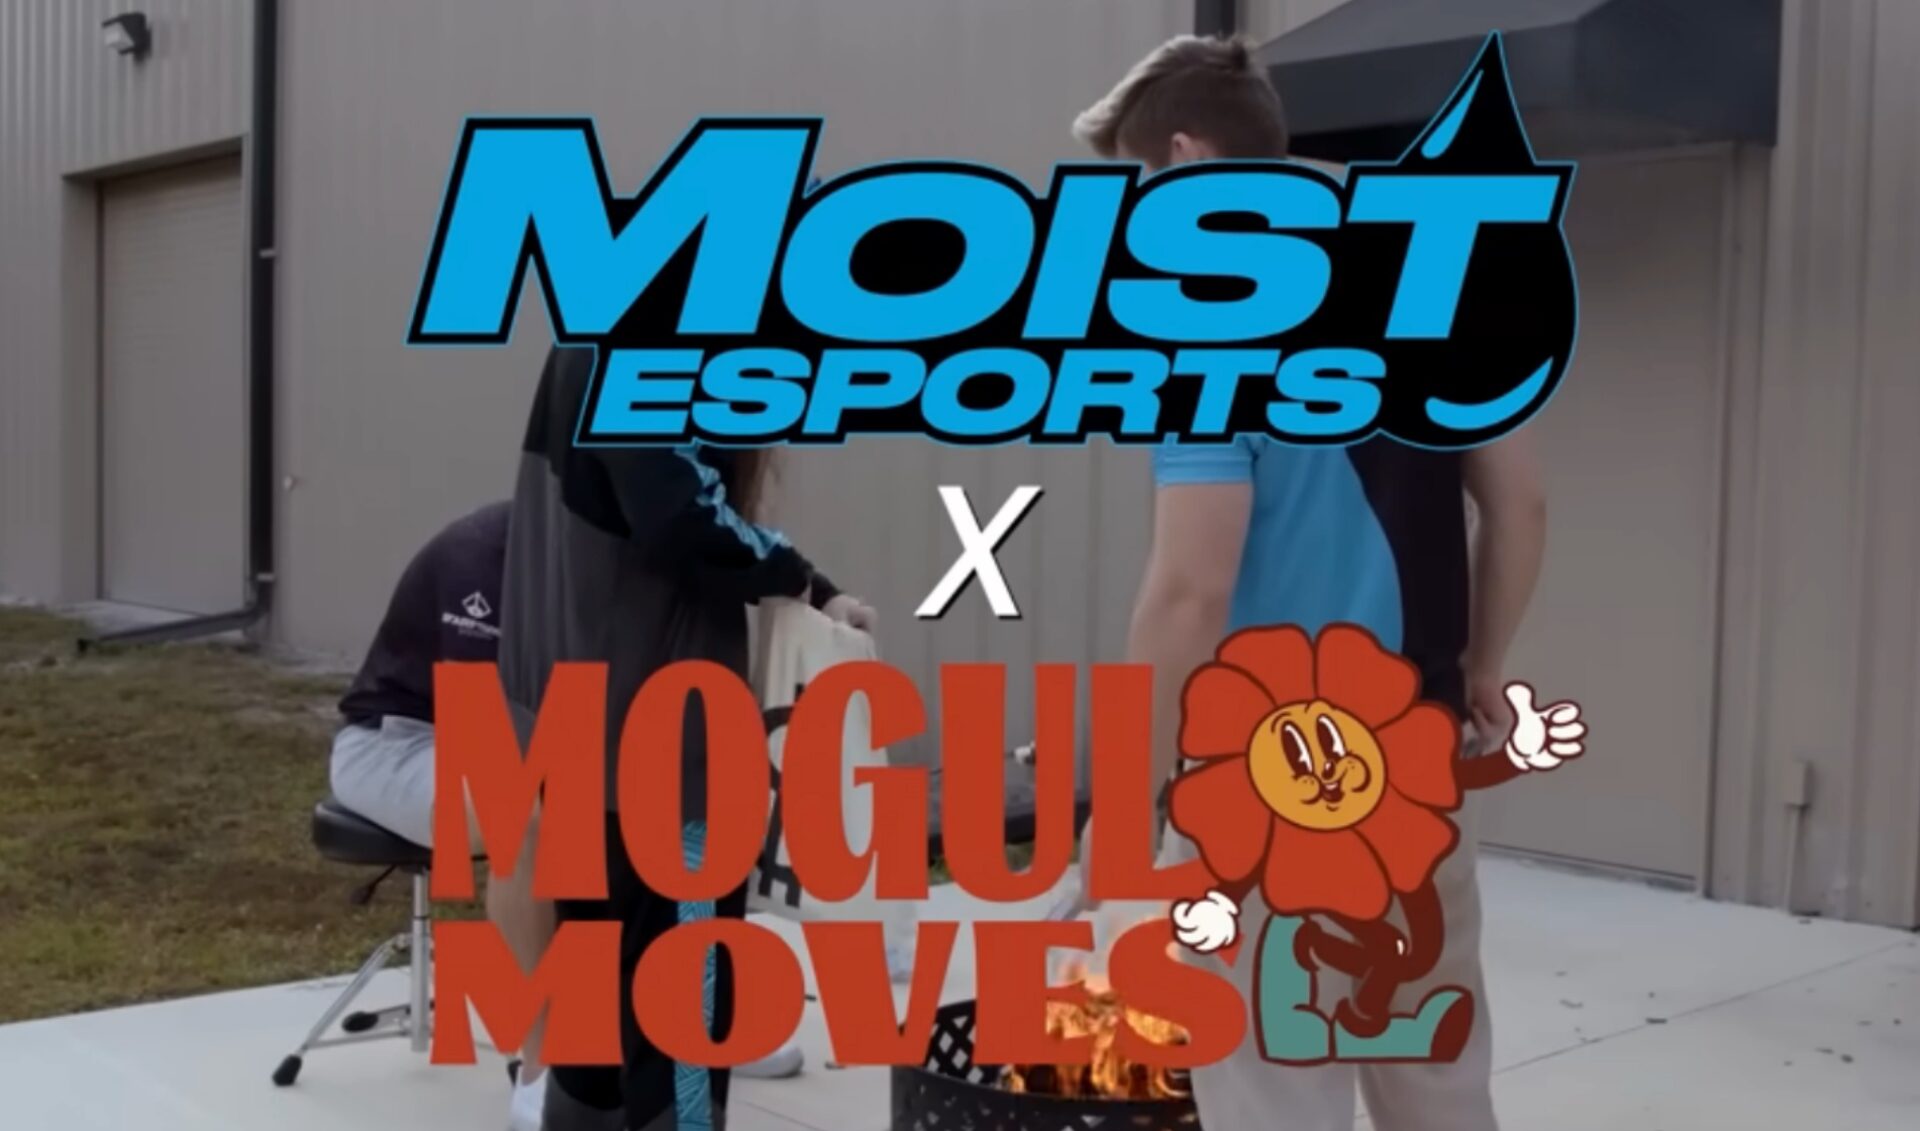 Ludwig joins Moist Cr1TiKaL’s esports organization as co-owner